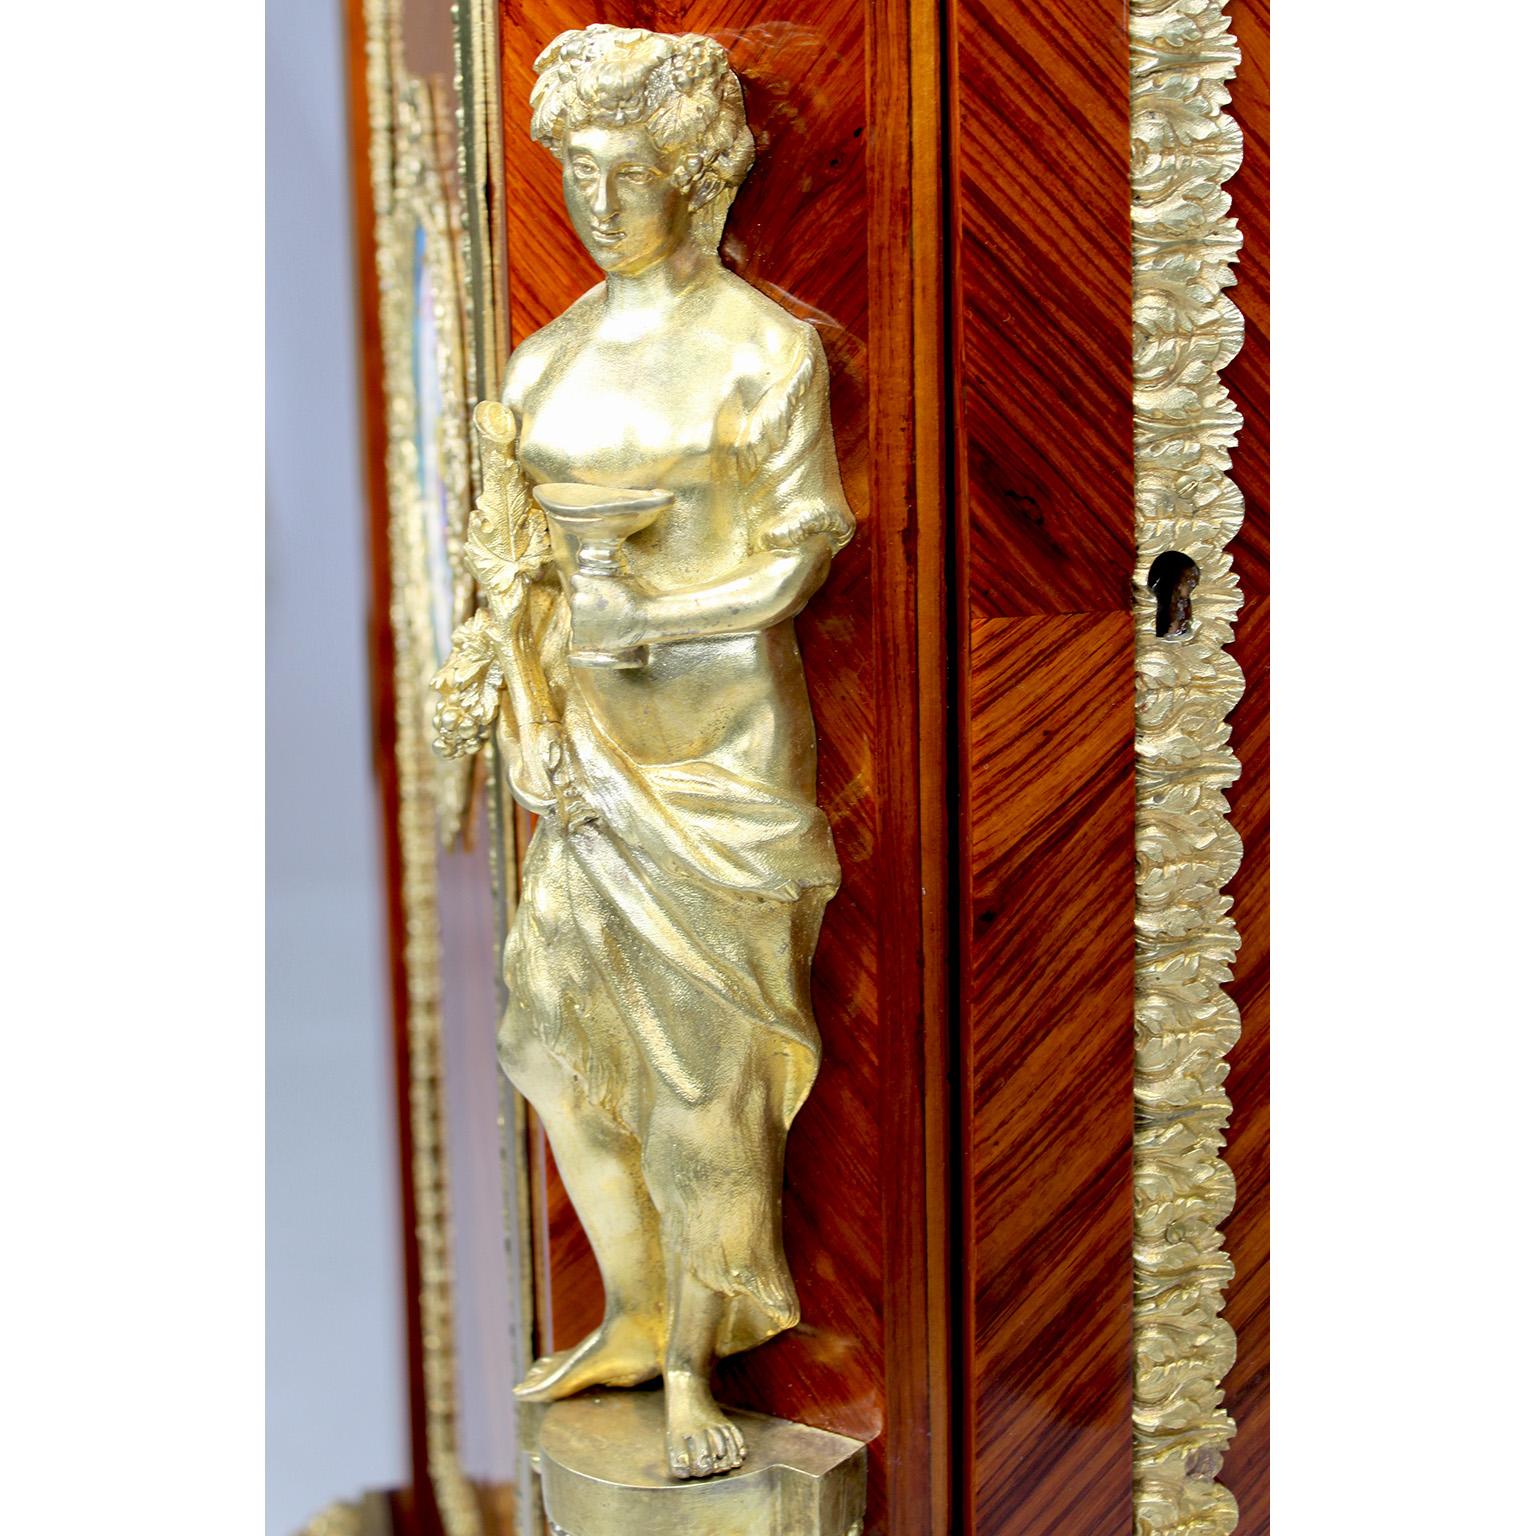 French Napoleon III Ormolu & Porcelain Mounted Cabinet Meuble D'Appui by Befort For Sale 9